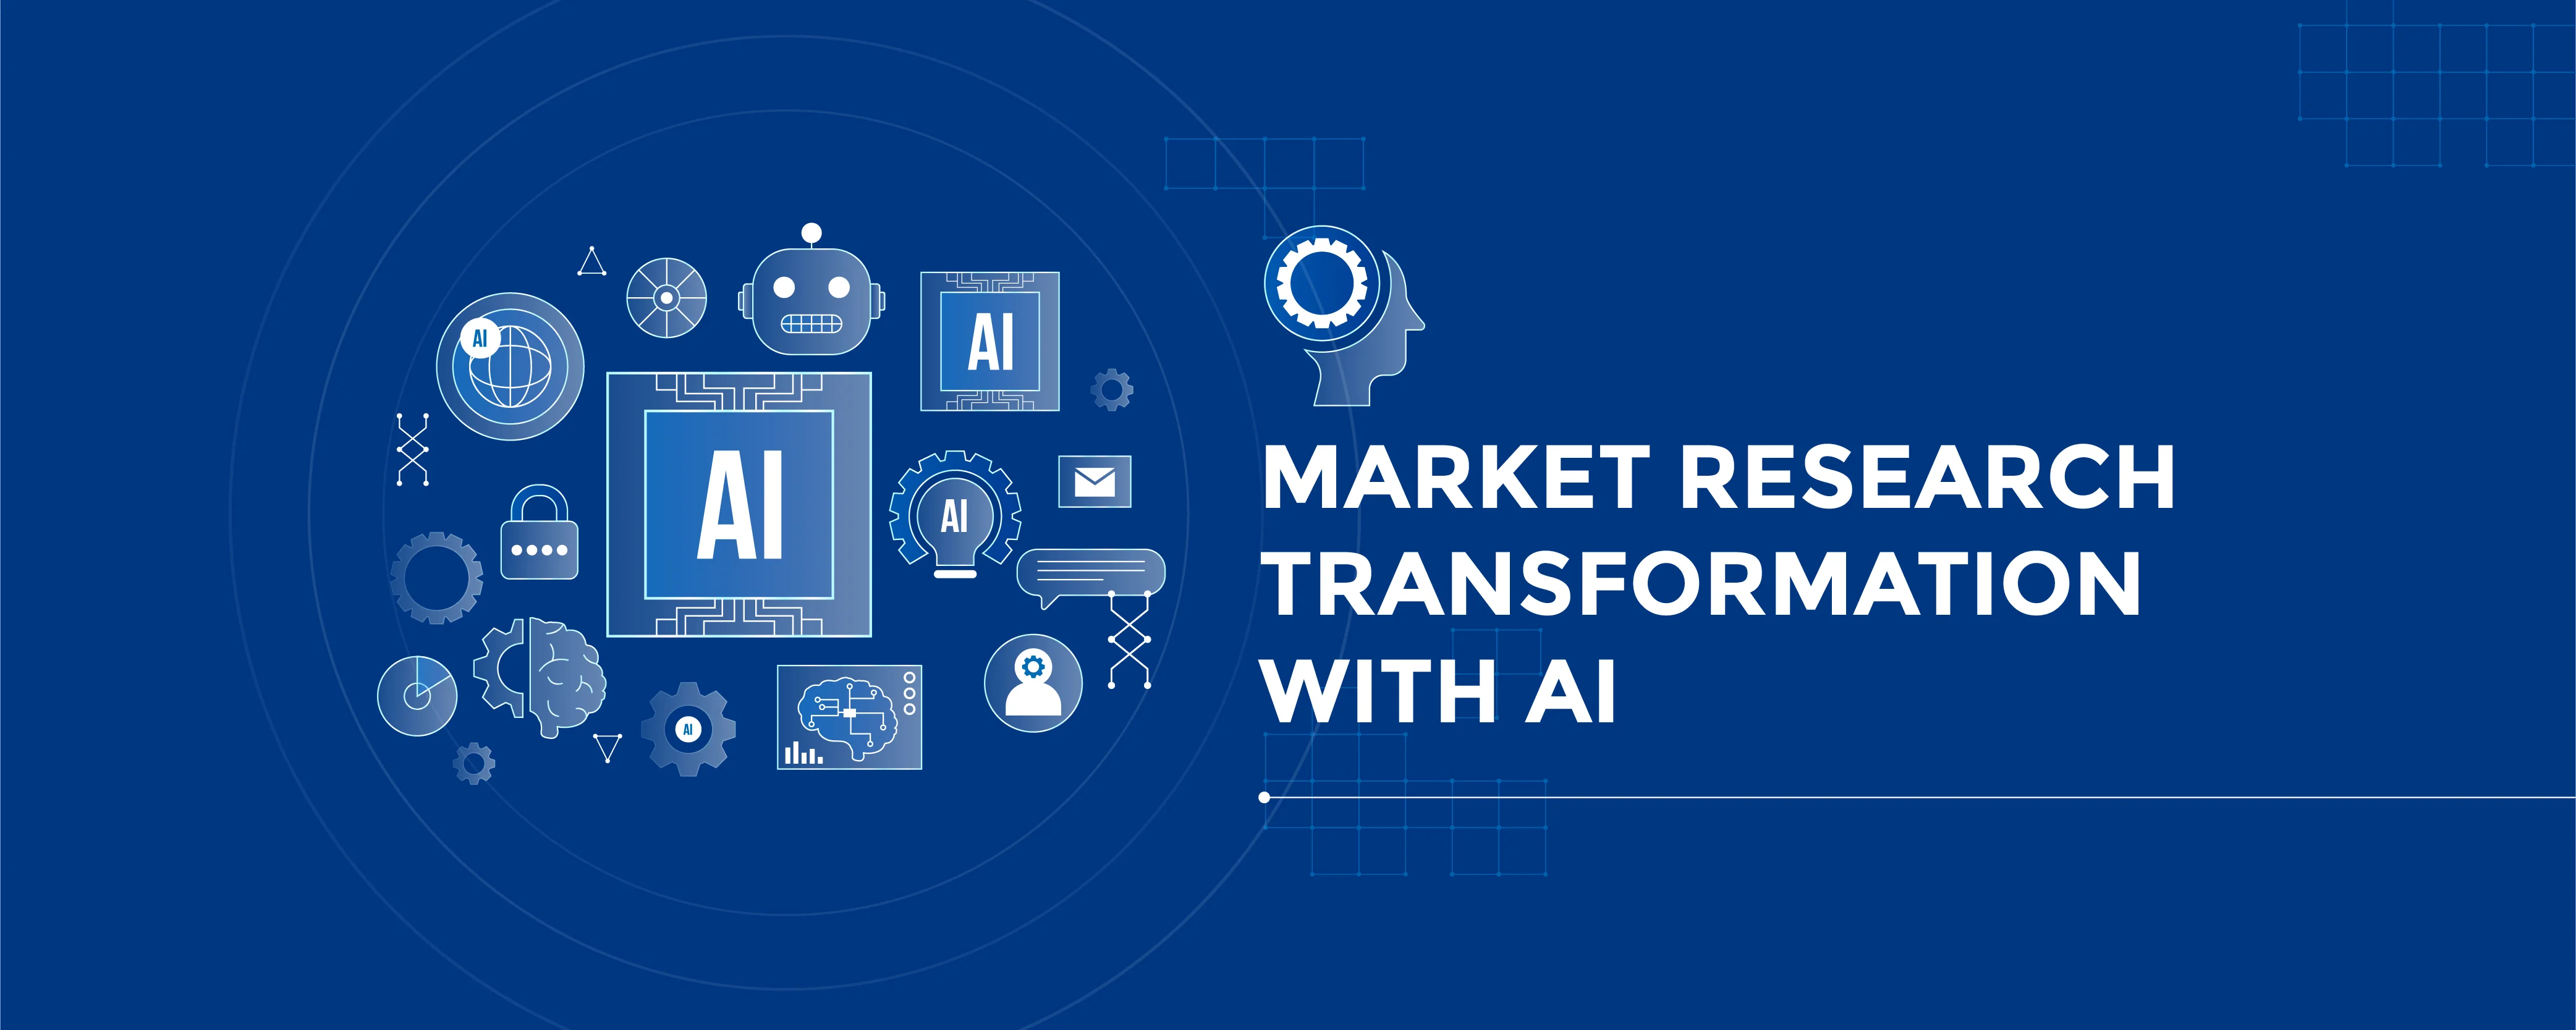 Market Research Transformation with AI